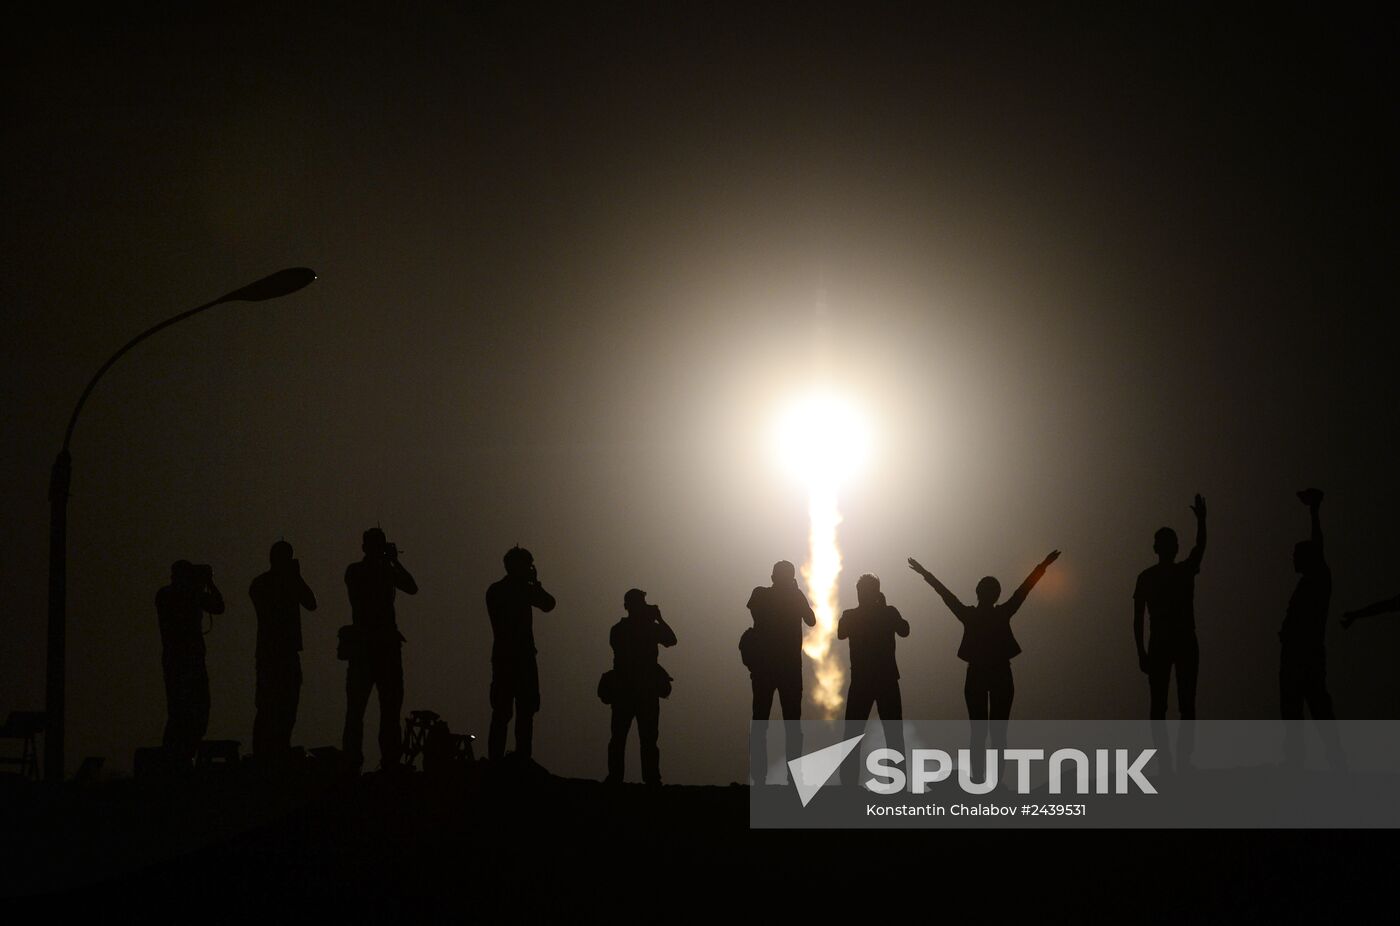 Soyuz-TMA-13M manned spacecraft lifts off from Baikonur Space Center